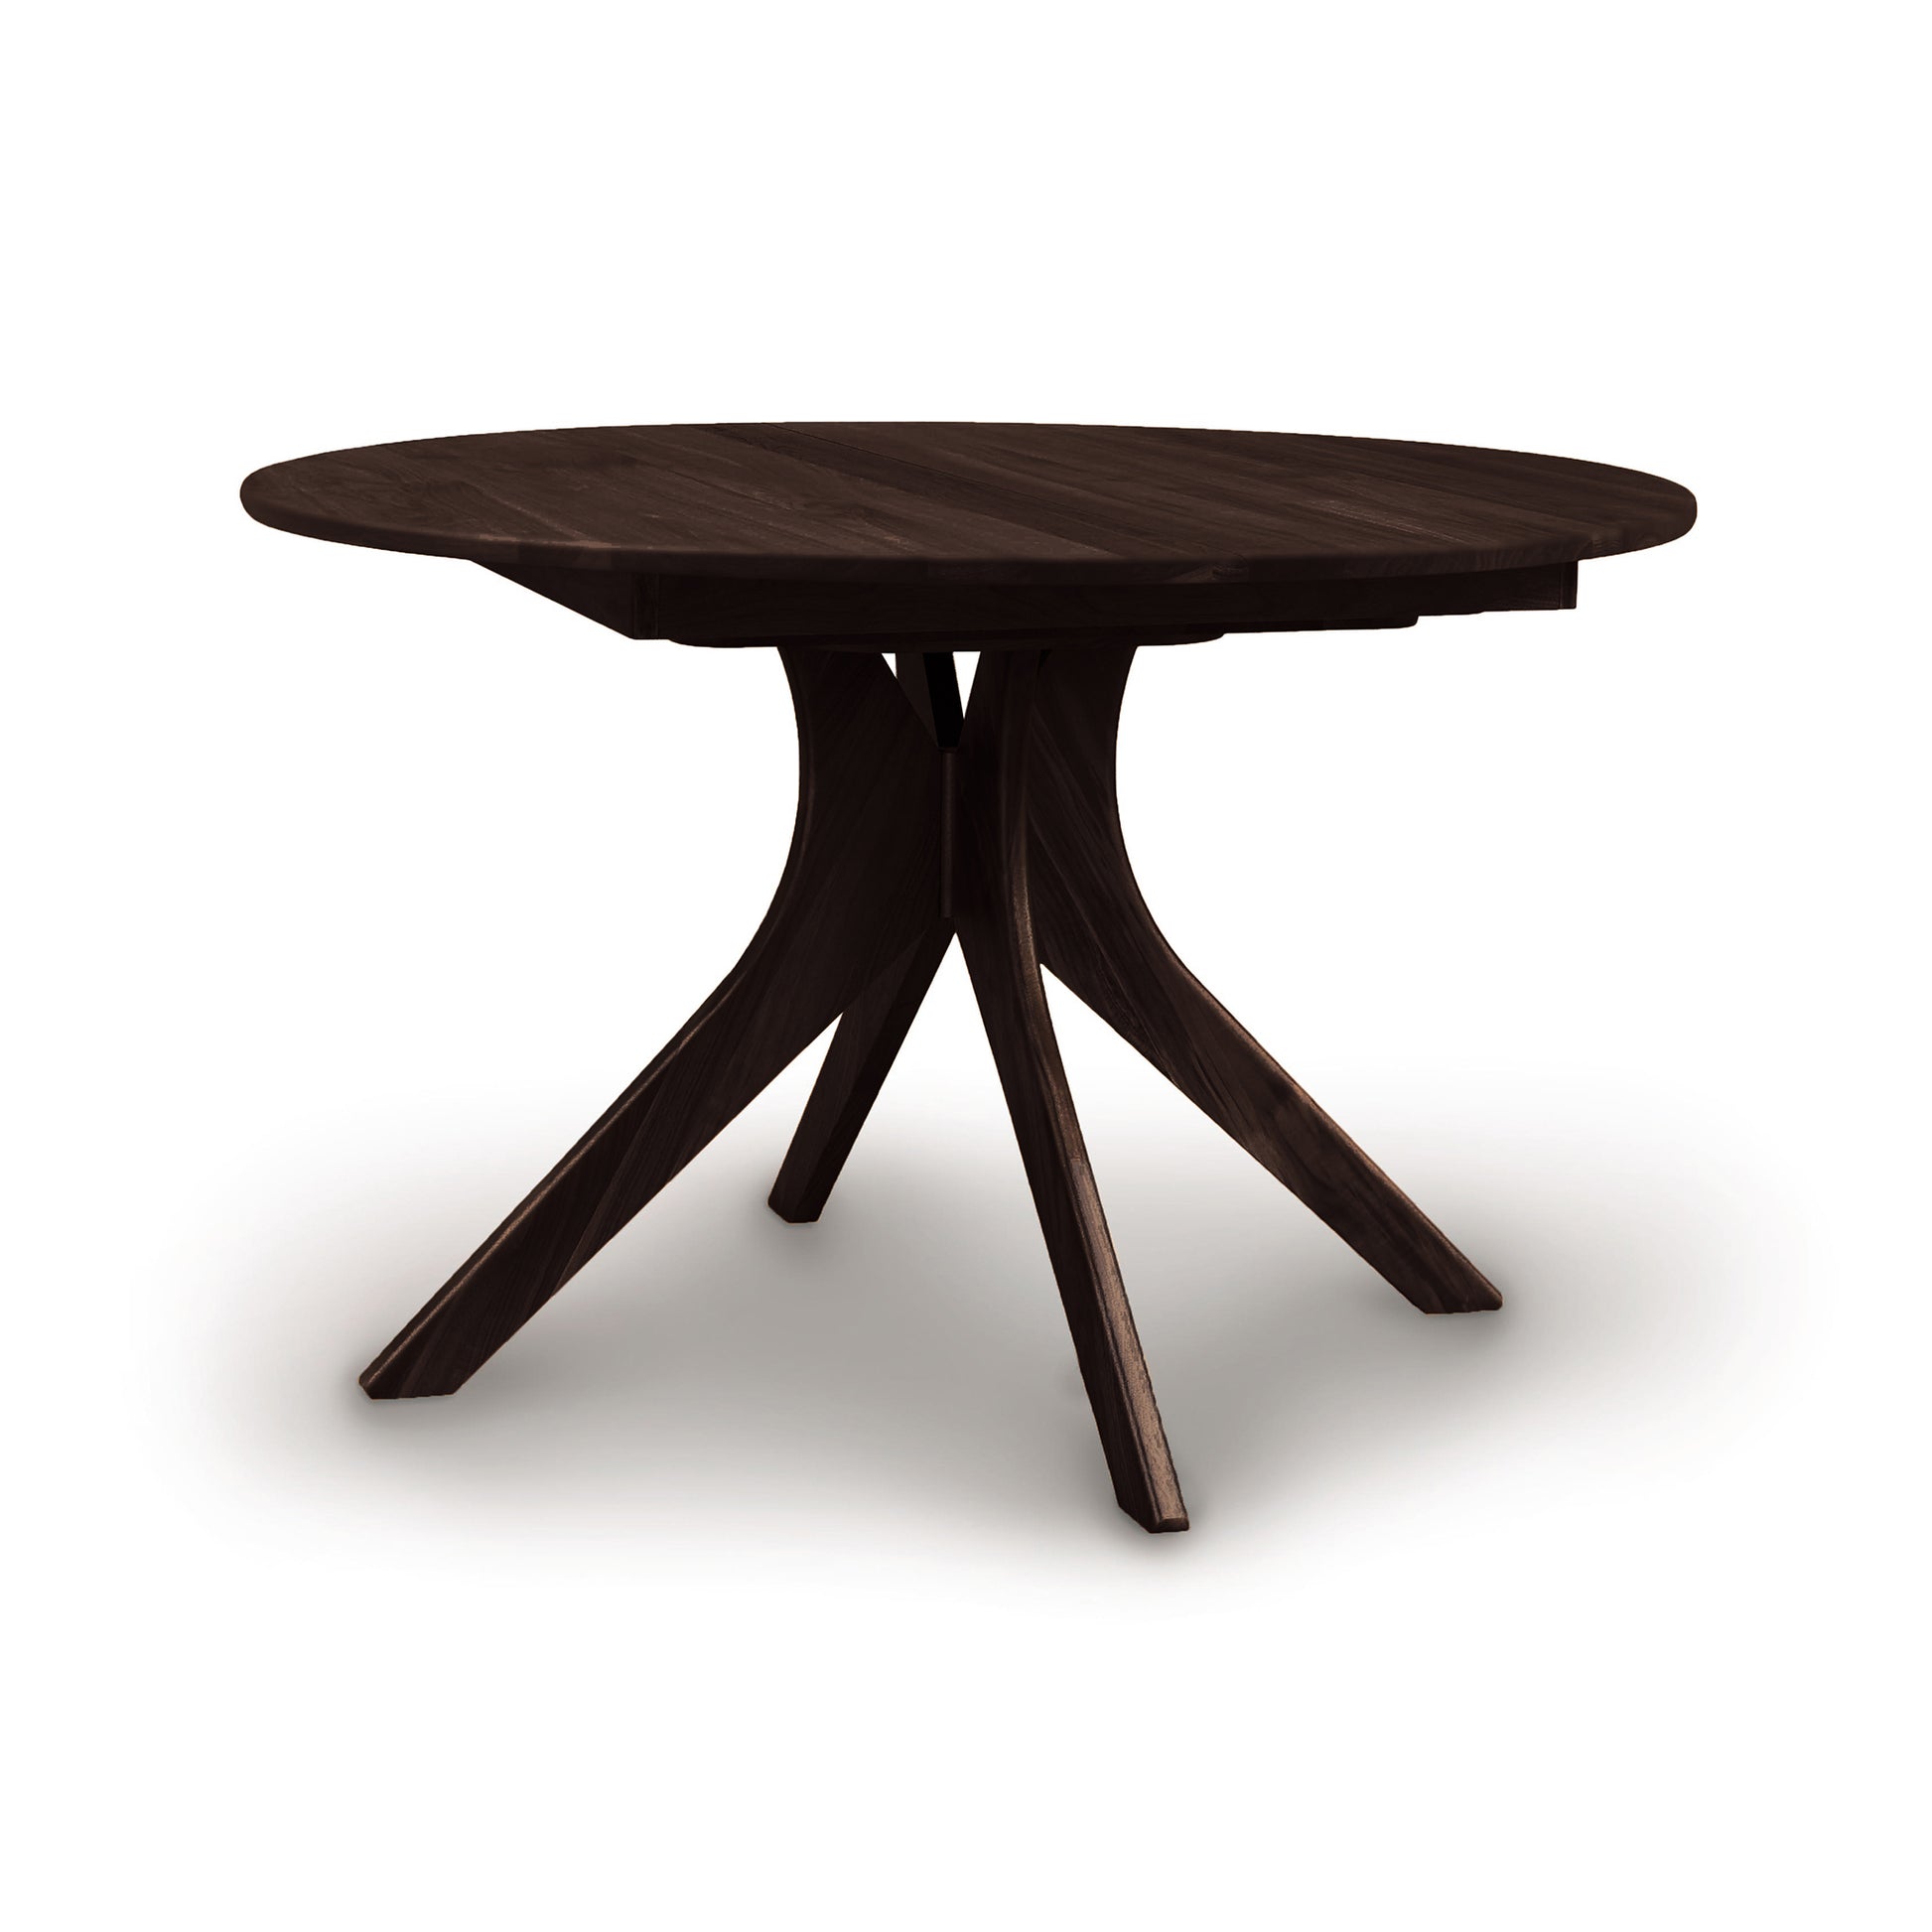 An Audrey Round Extension Dining Table by Copeland Furniture with a solid wood top.